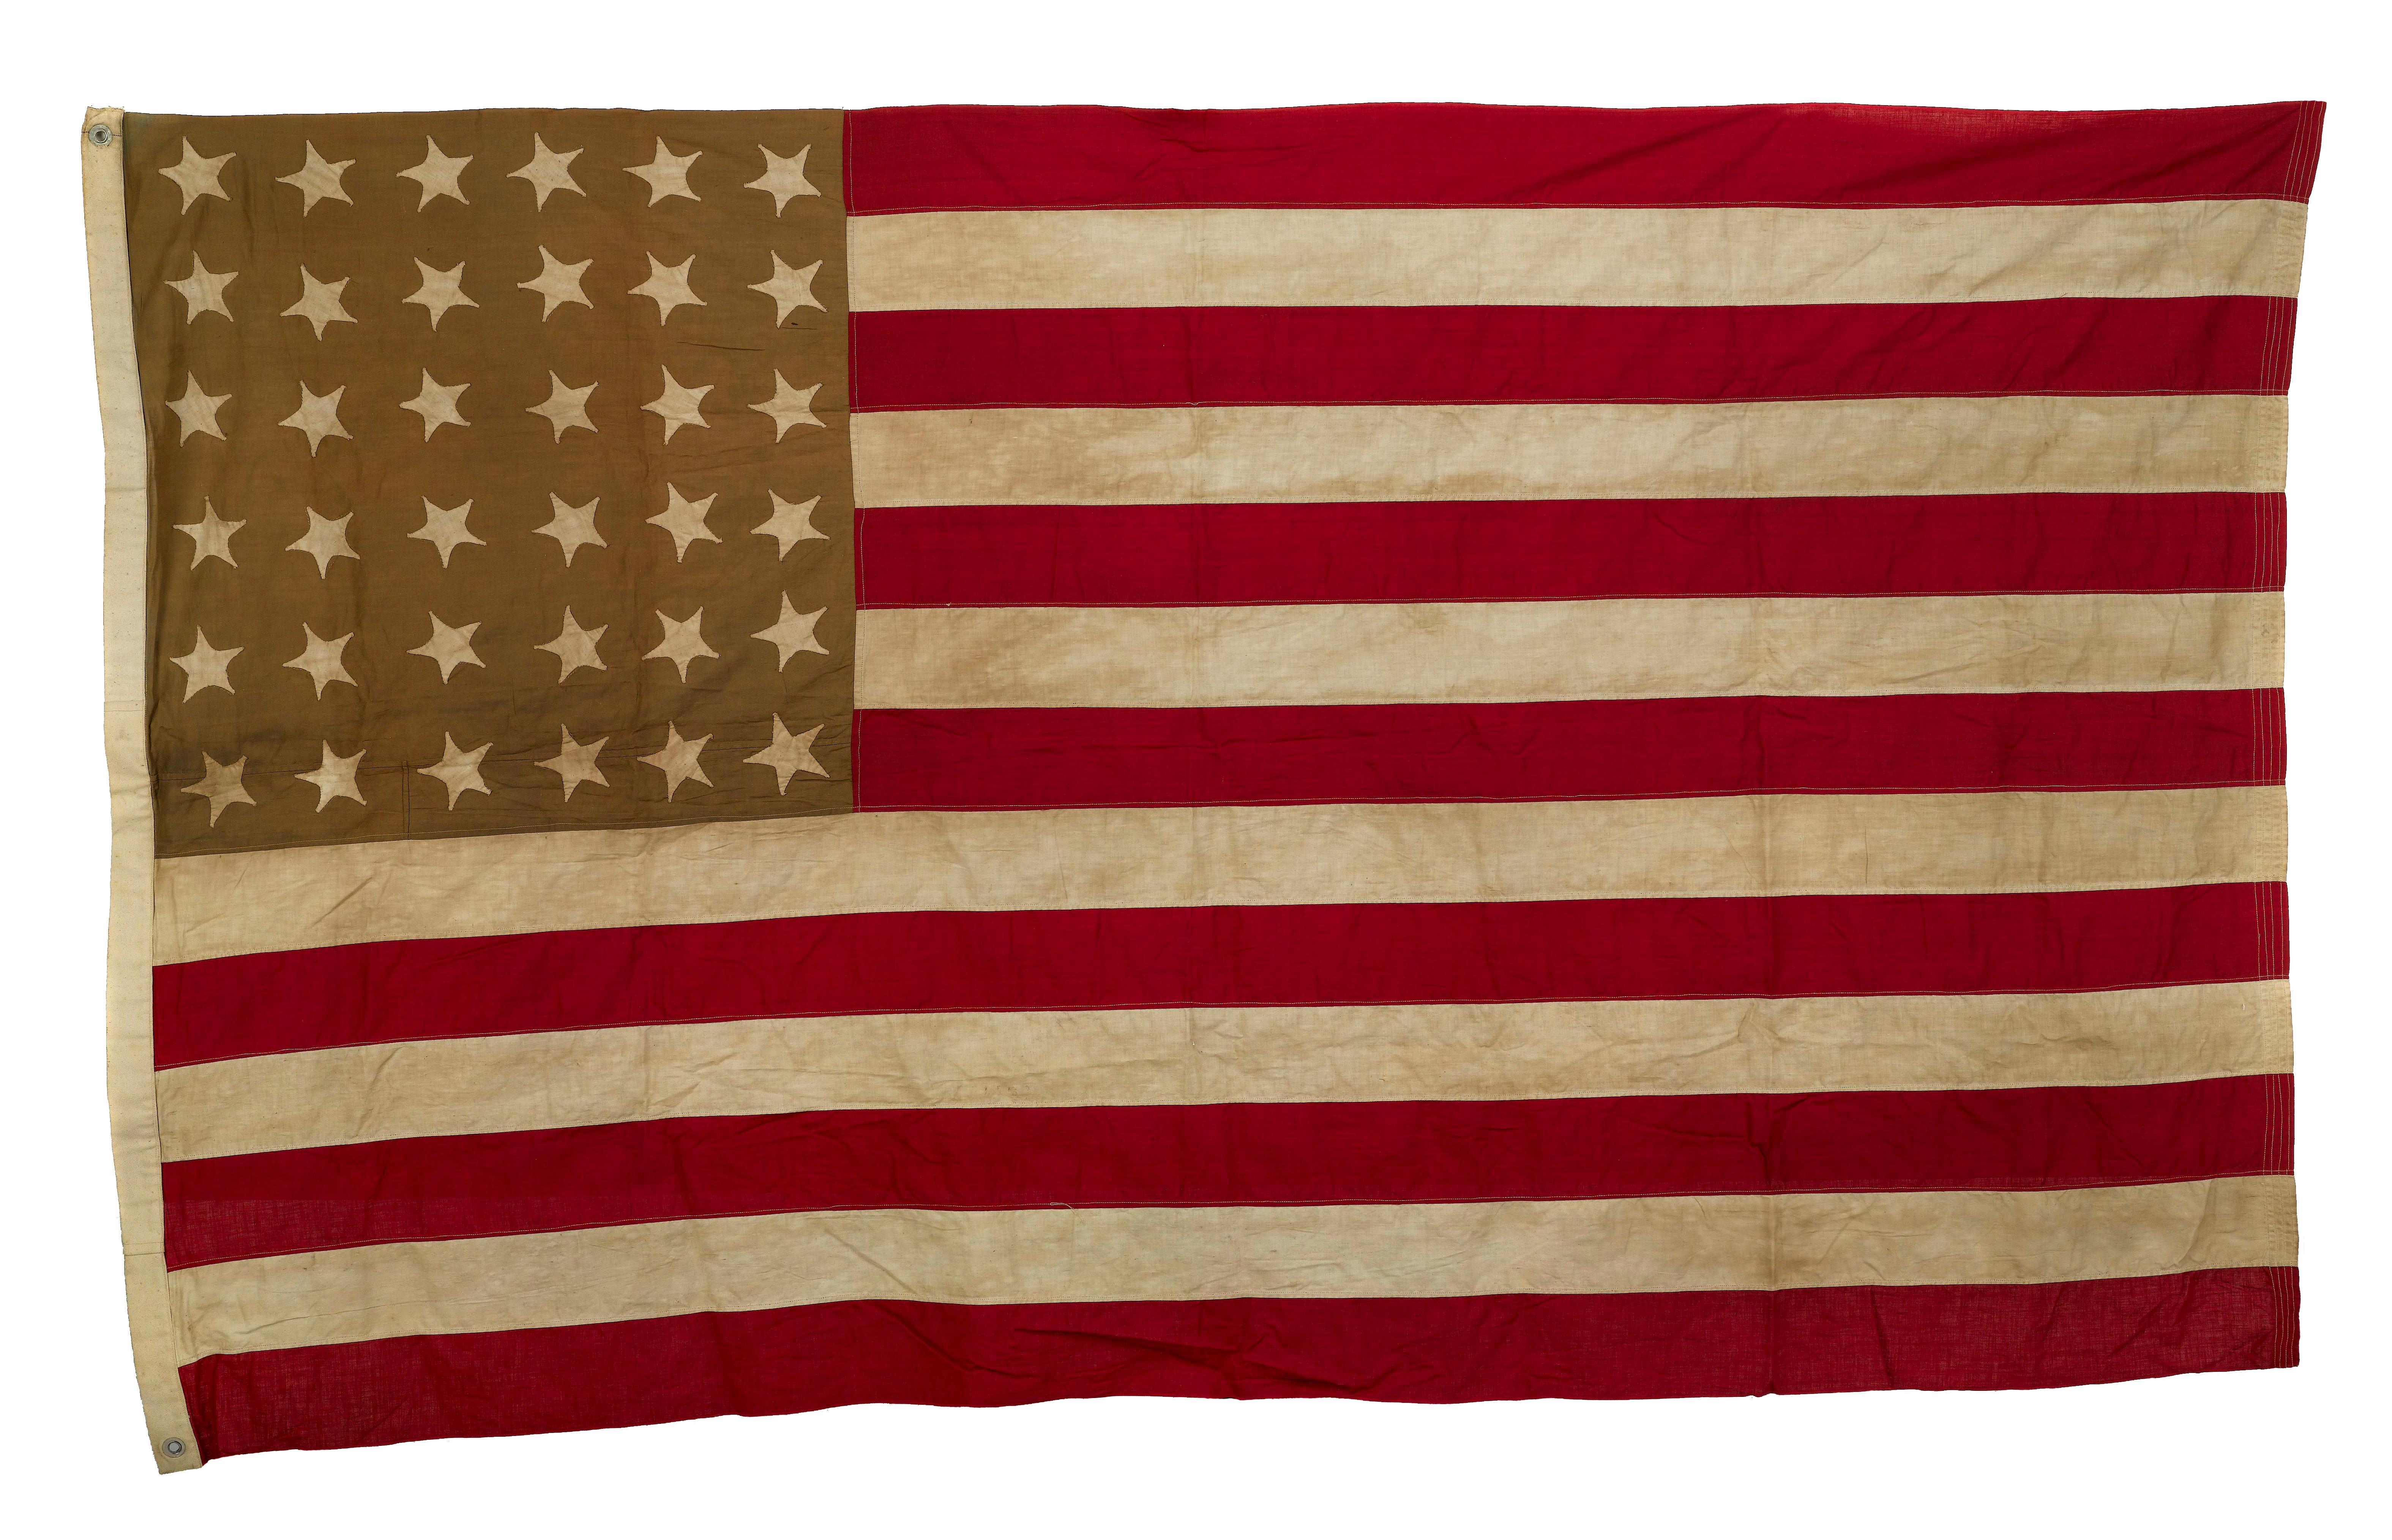 This is a 36-star hand-sewn antique flag, as striking as it is scarce. 36 stars celebrate the addition of Nevada to the Union and officially flew from July 4, 1865 to July 3, 1867, under President Andrew Johnson. This large flag has an impressive